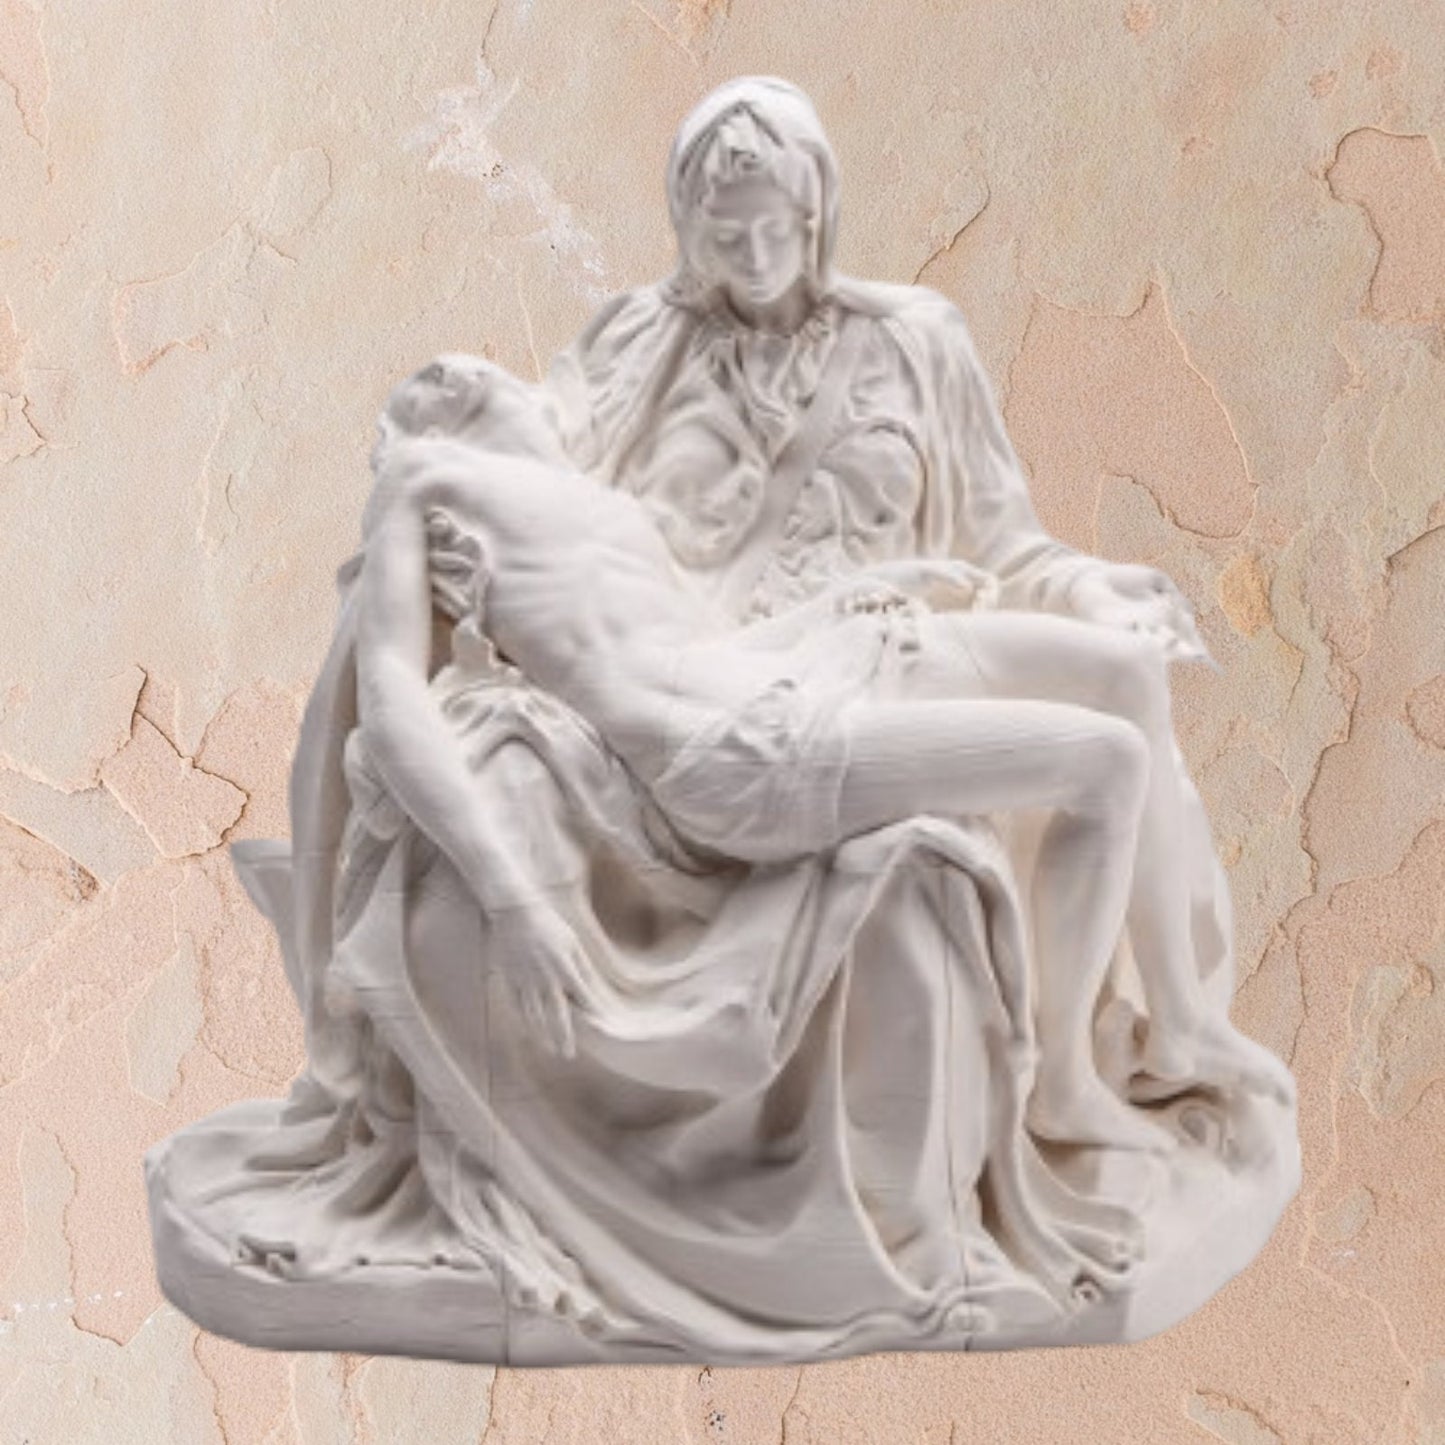 Pieta Michelangelo Mary and Jesus - Unique 3D Printed Religious Sculpture for Home Dcor or Gift